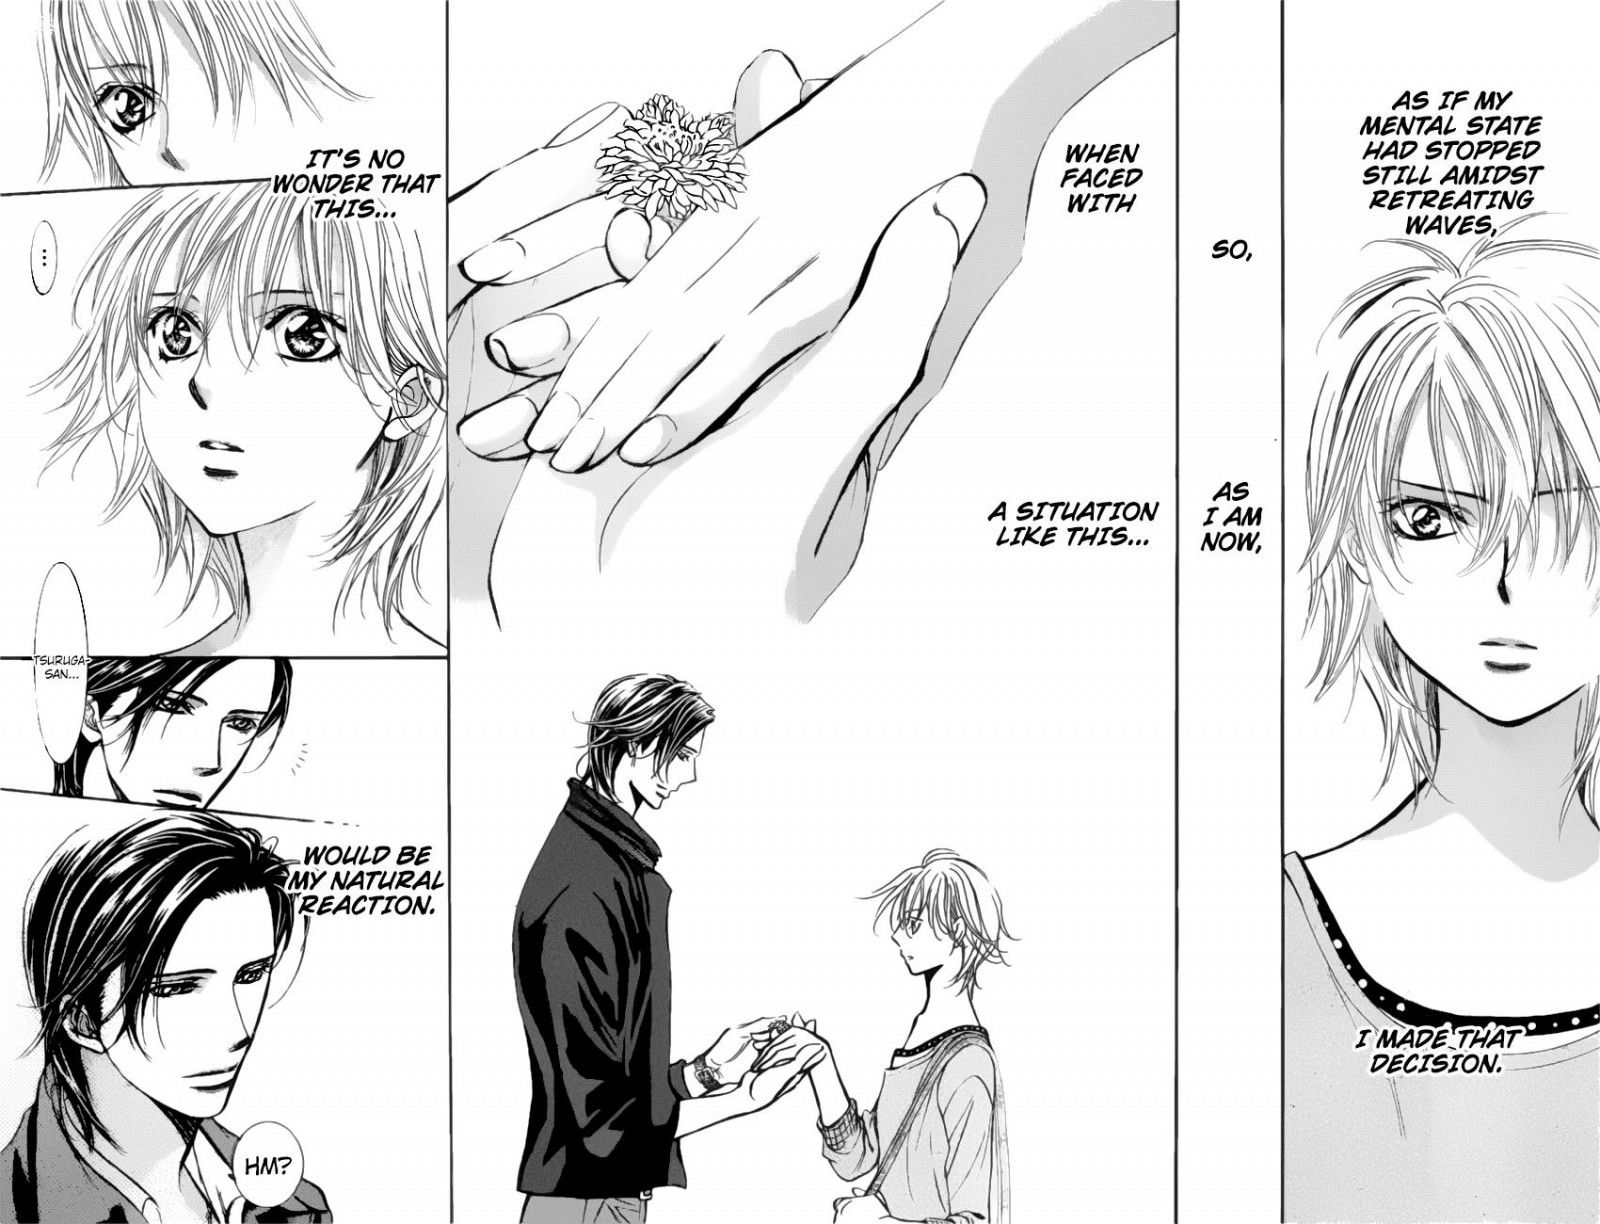 Skip Beat!, Chapter 263 Unexpected Results - 2 Days Earlier - image 02